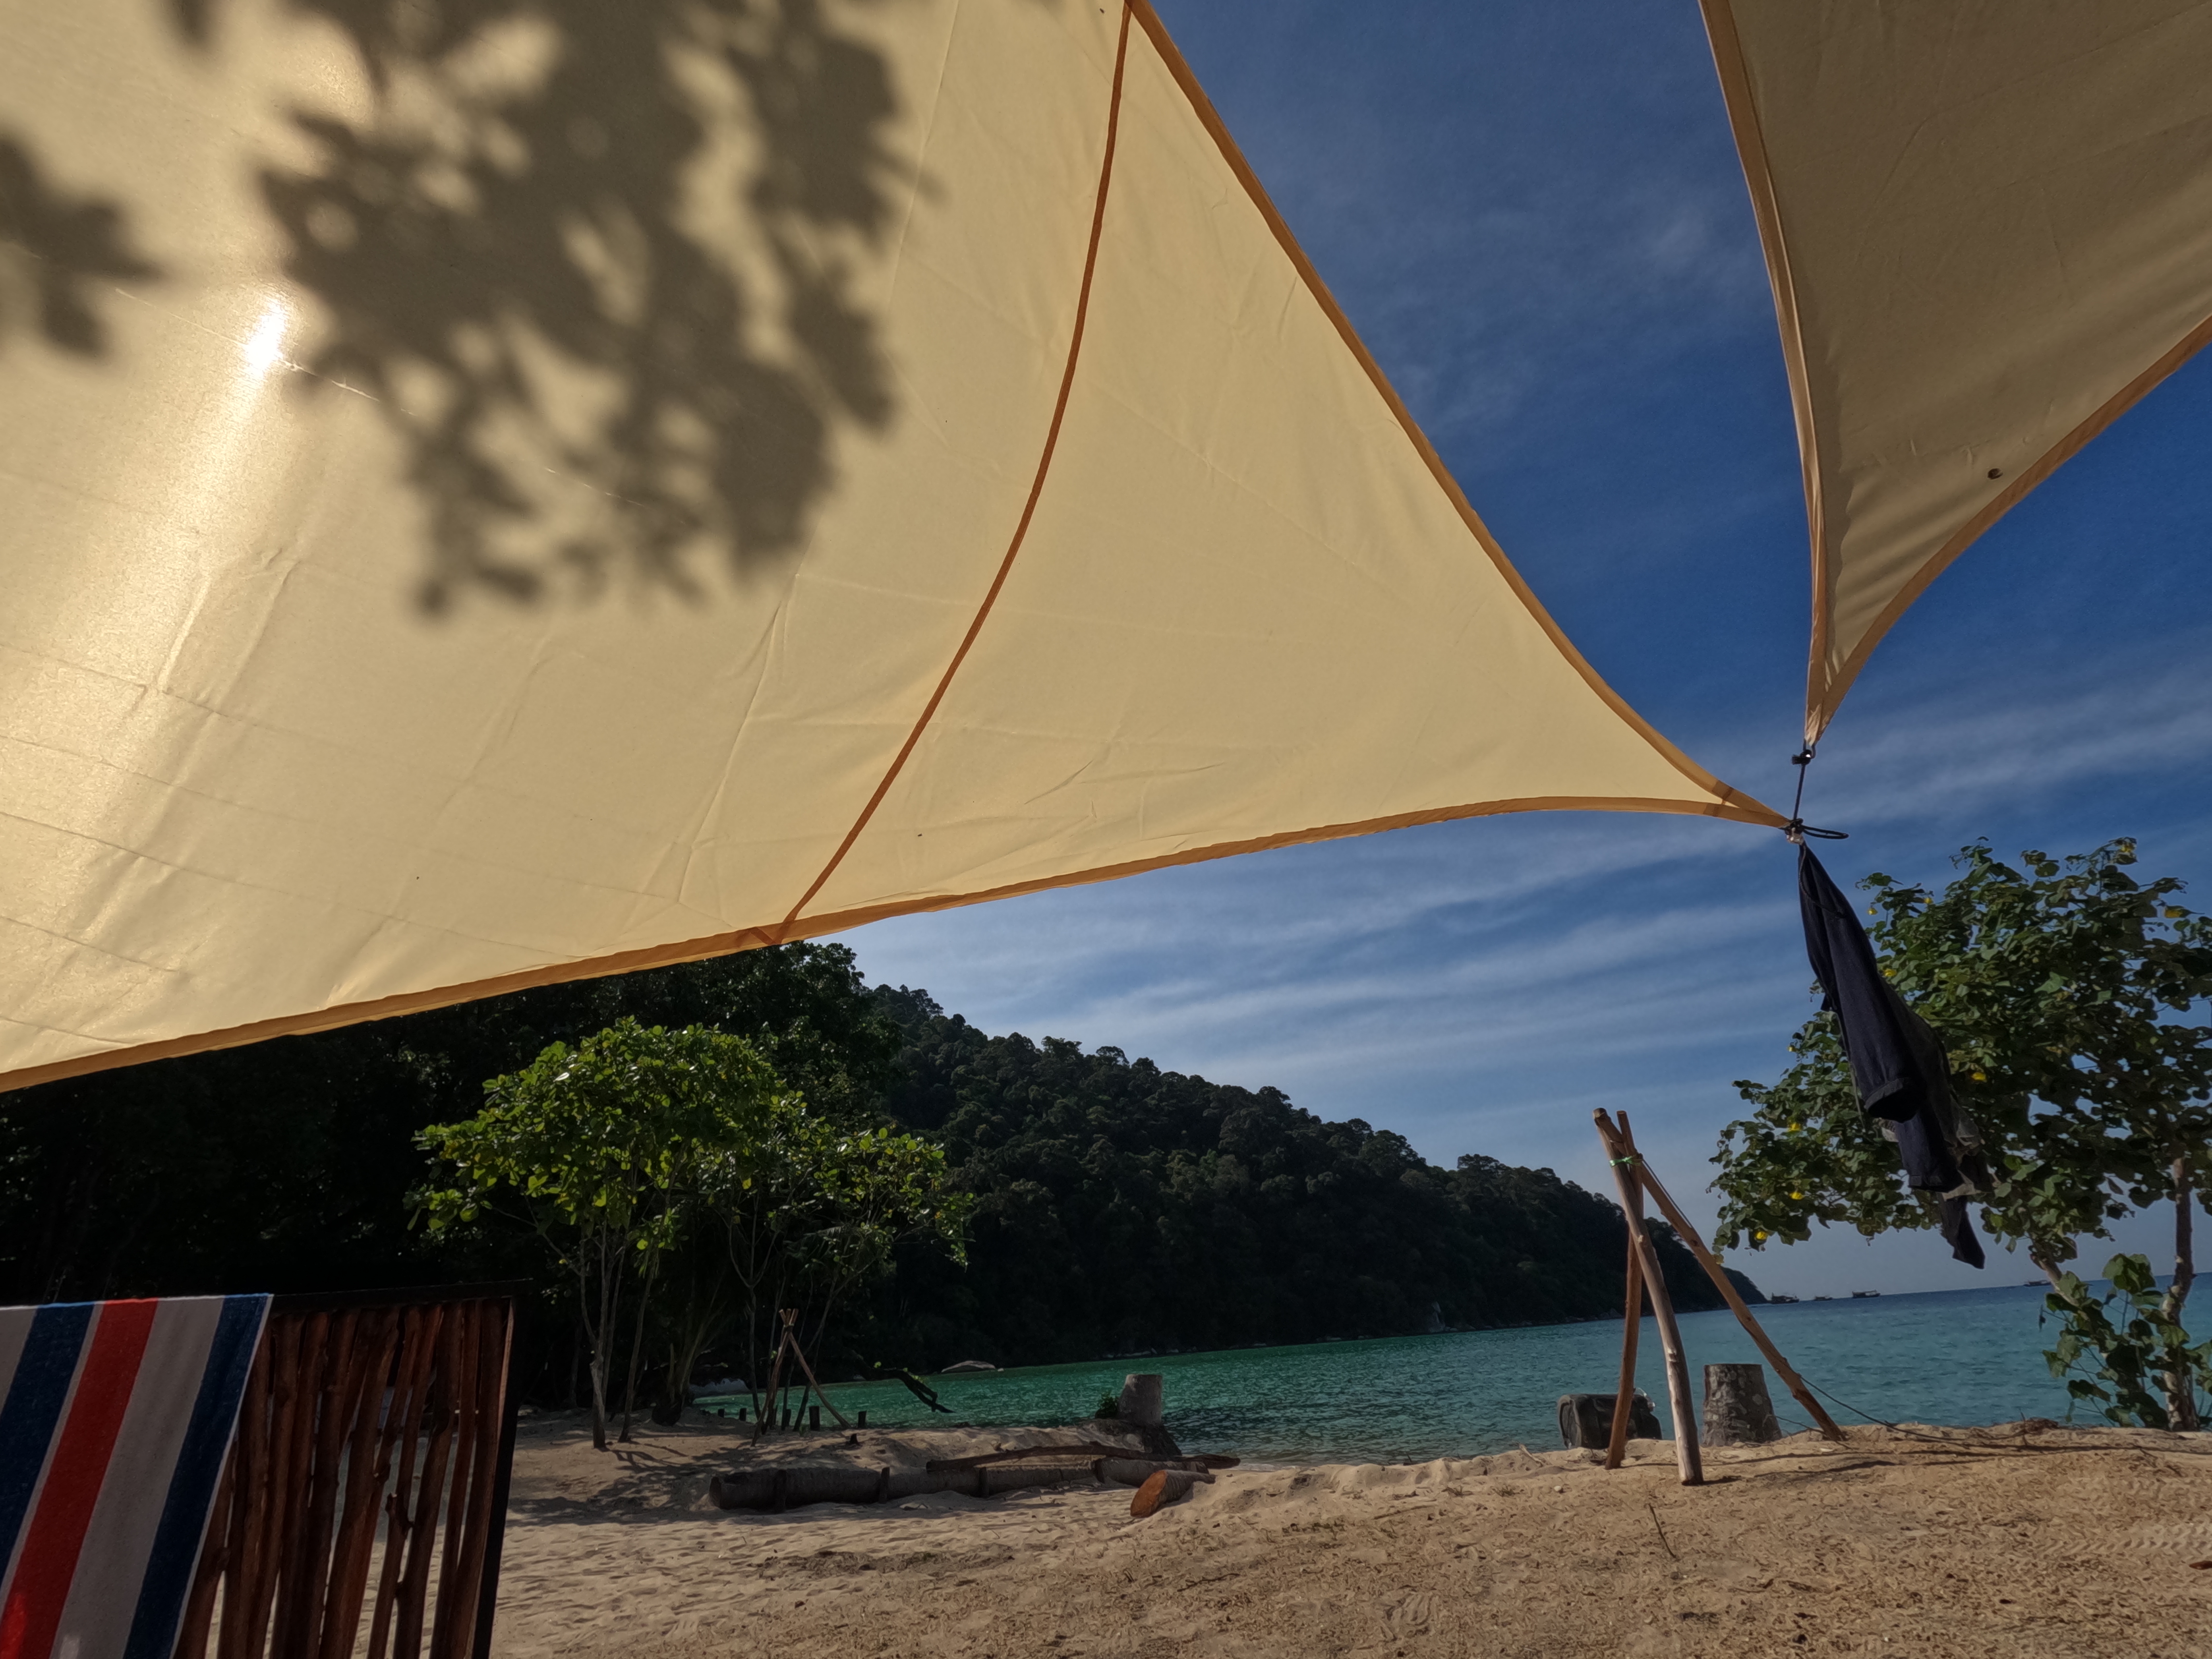 A fusion of glamour and camping - GLAMPING is a way to authentically experience the most awesome isnpiring locales around the world.

Juita Glamping Perhentian offers a perfect lifestyle living to create experience, connect to the environment, gain networking around the world.